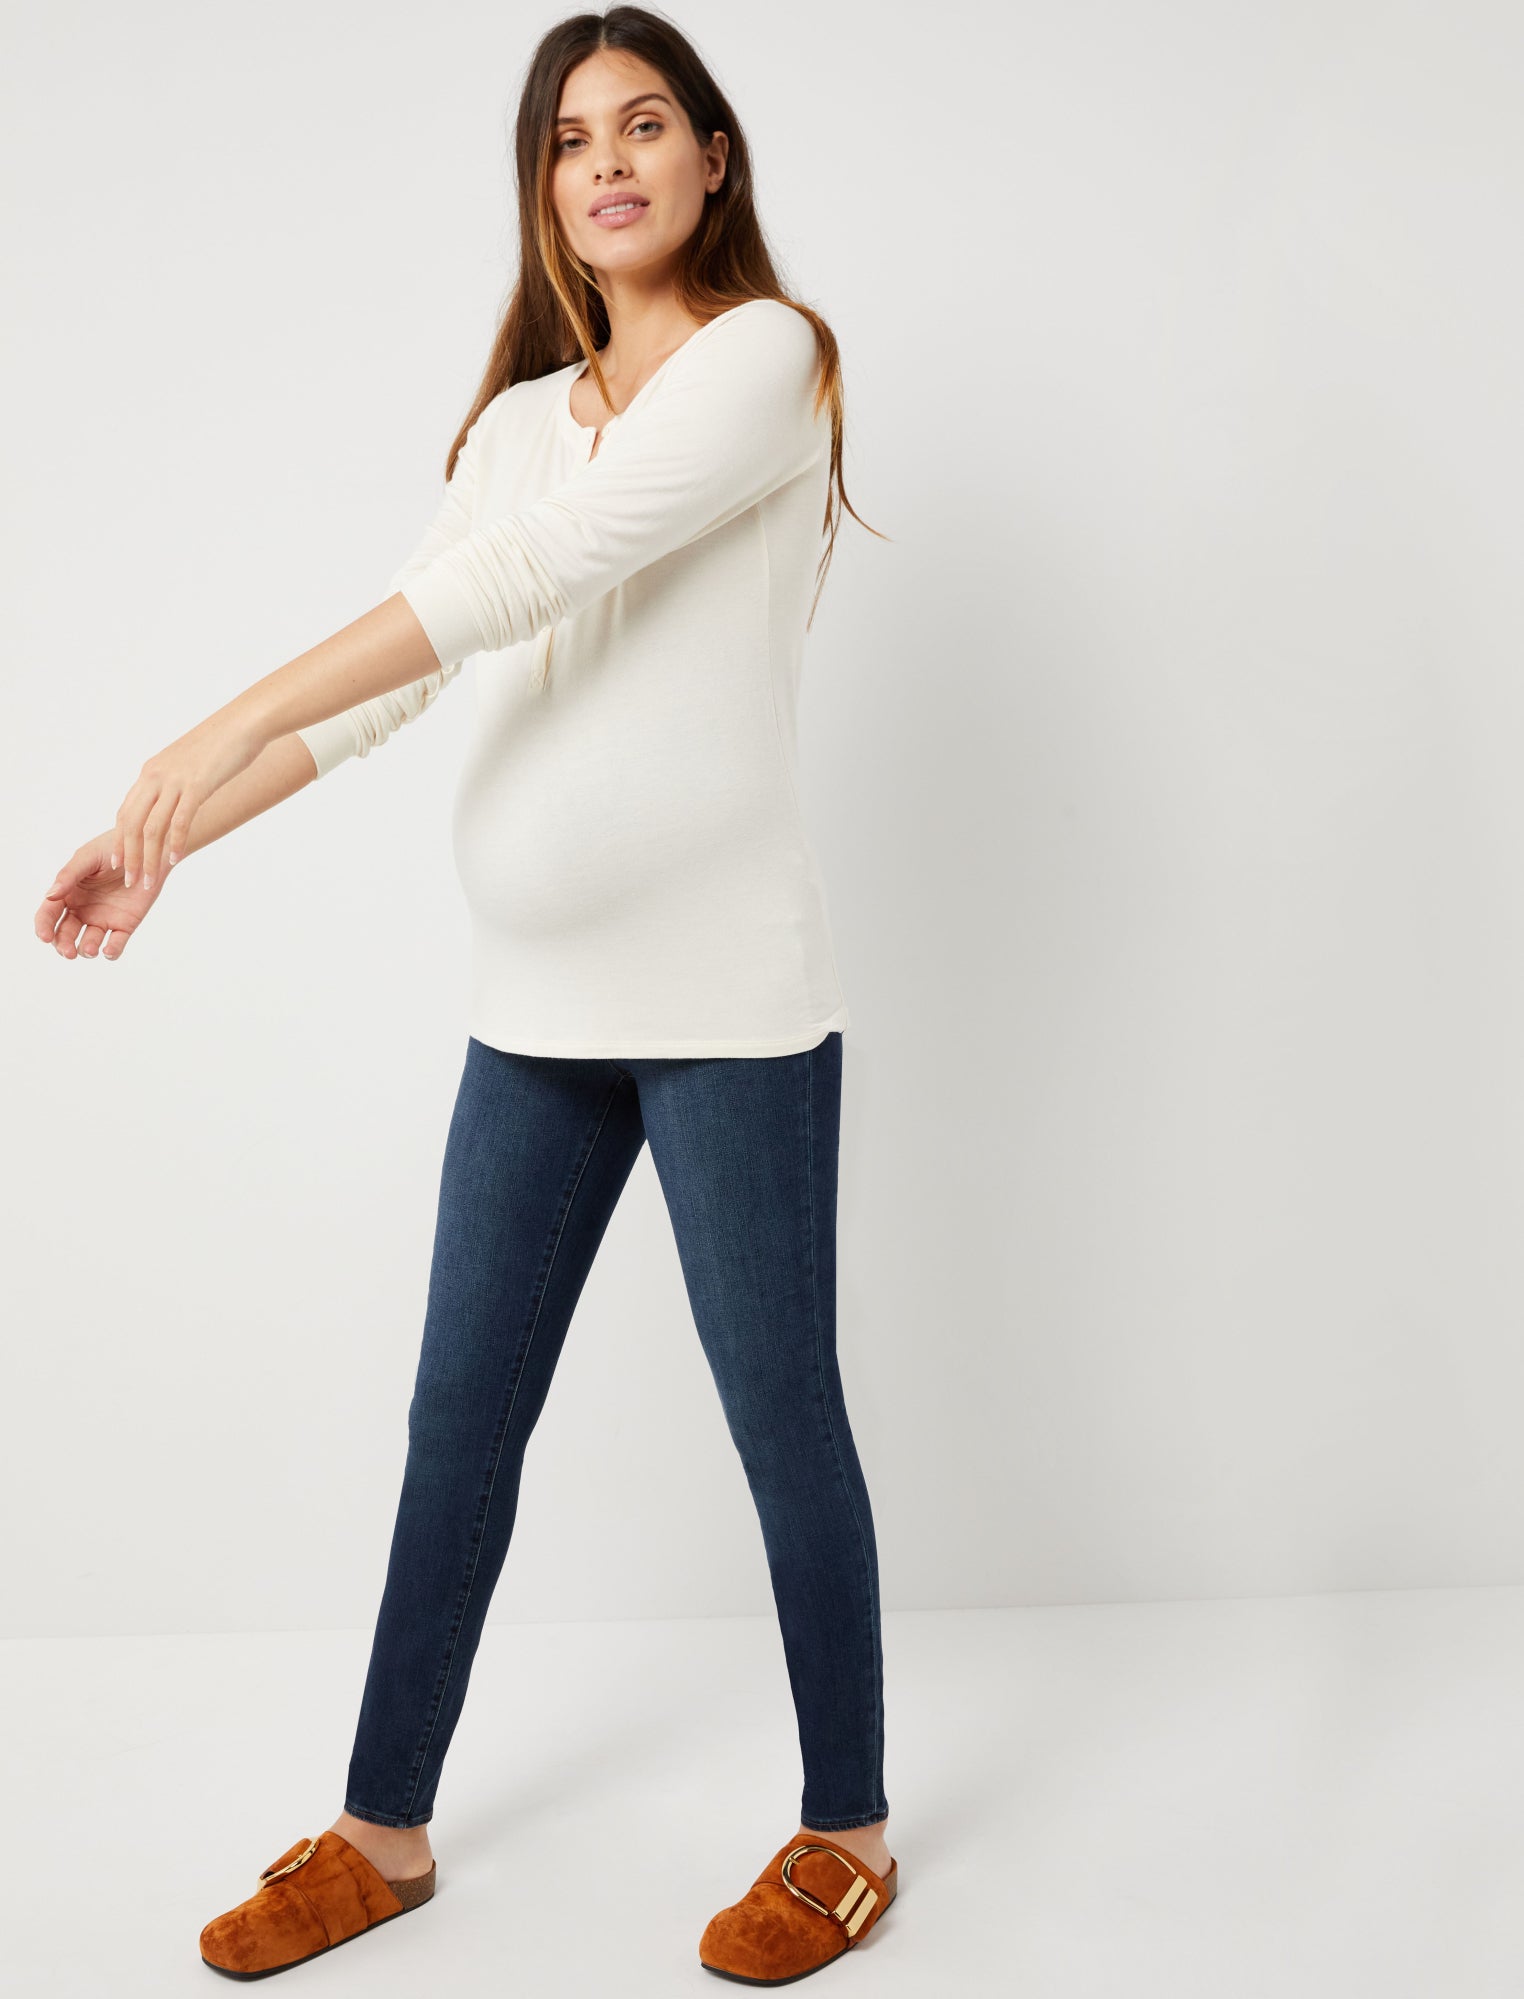 Selena Mama J Maternity Jeans by J BRAND for $23